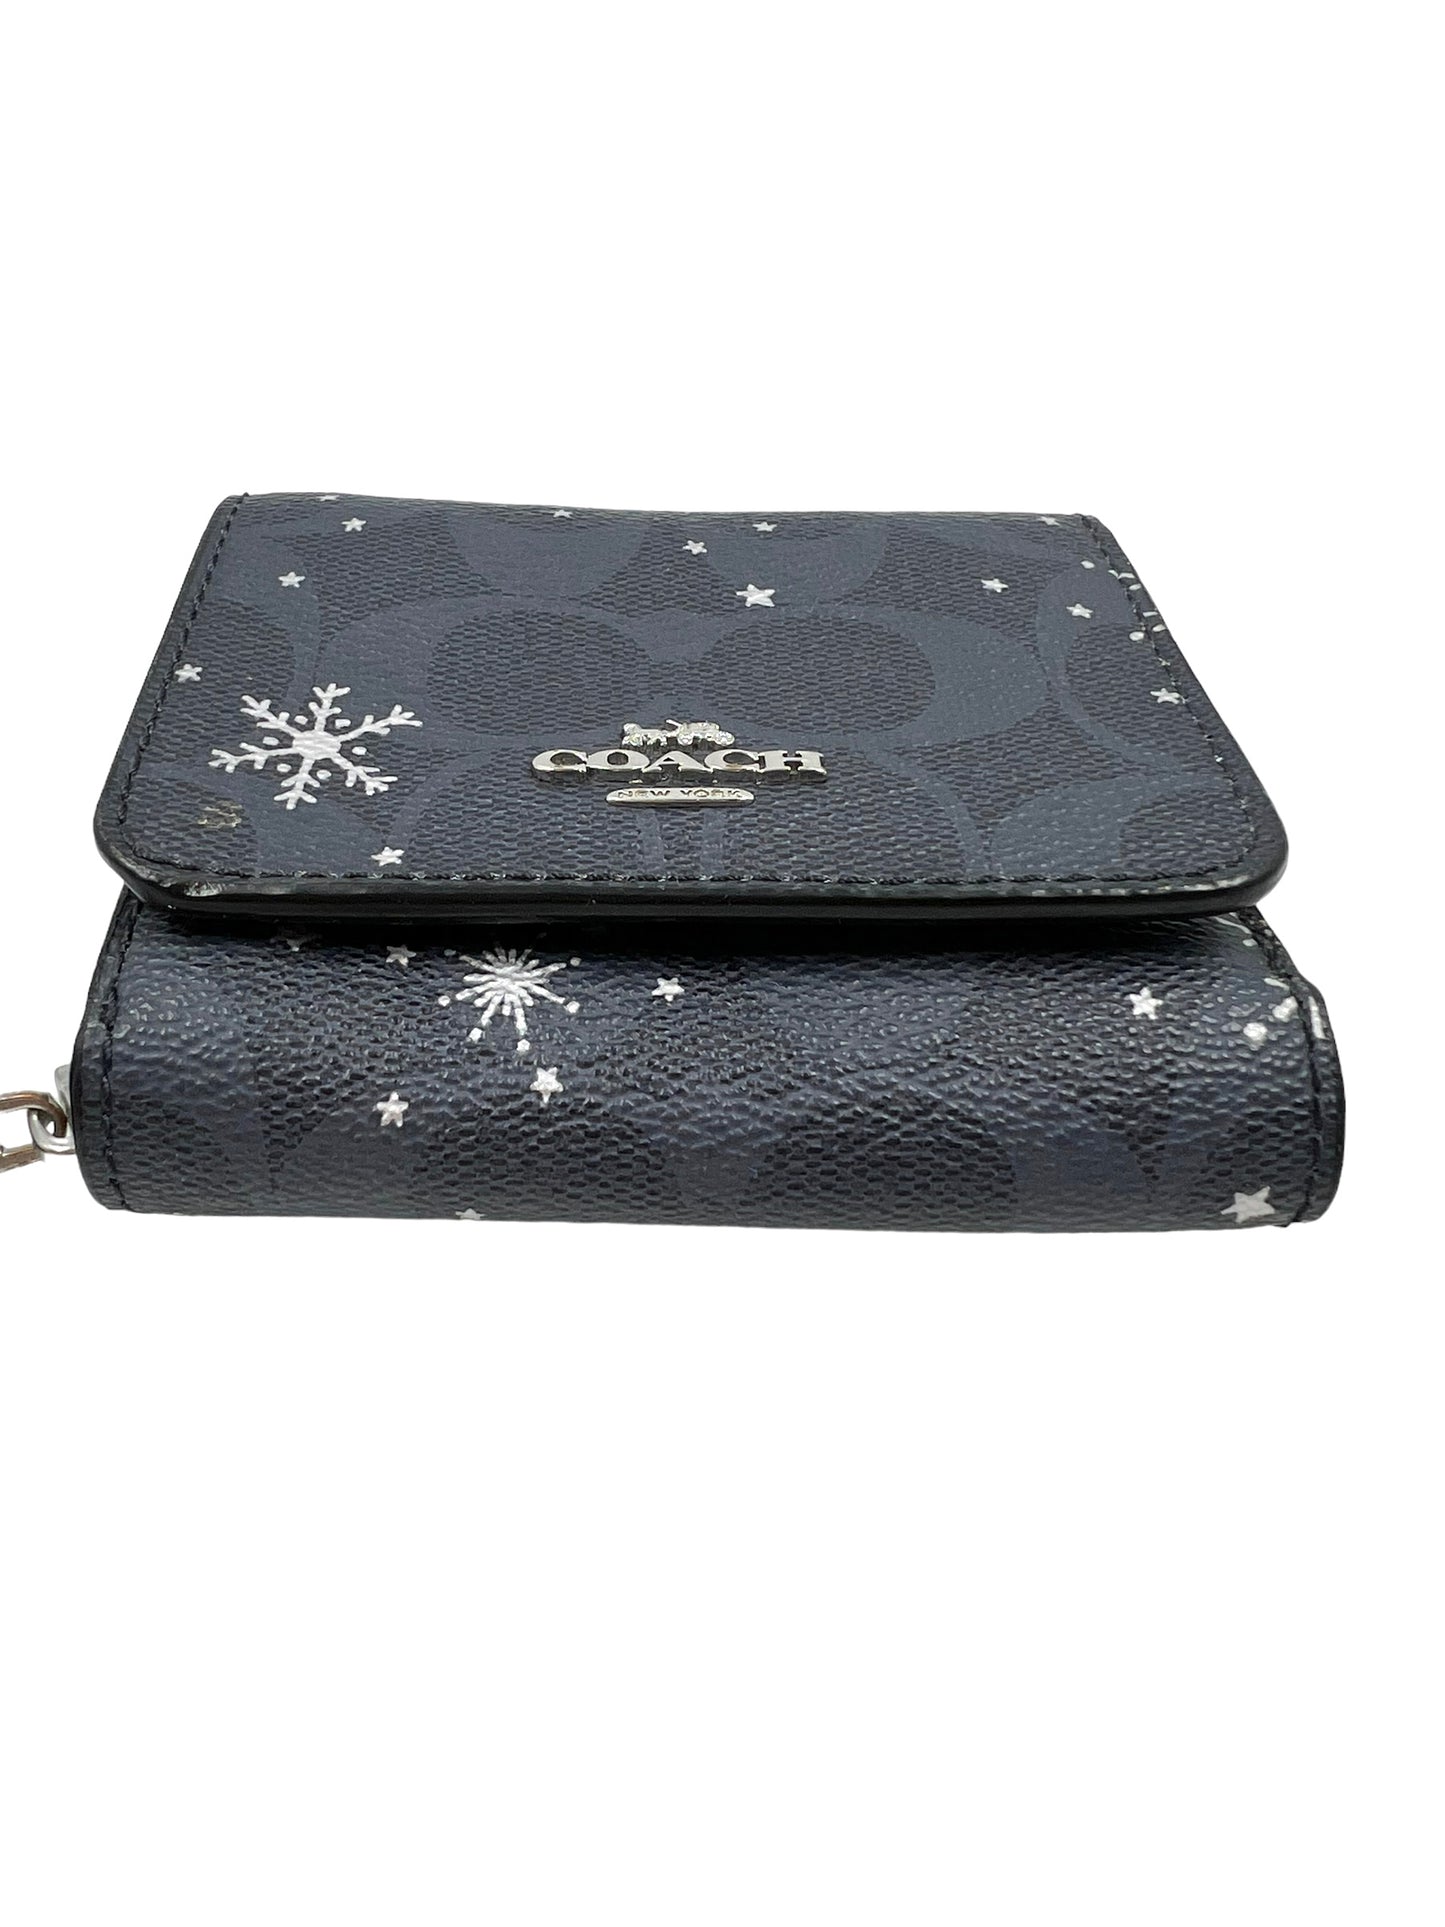 Coach Navy Small Signature Canvas Snowflake Print Trifold Wallet